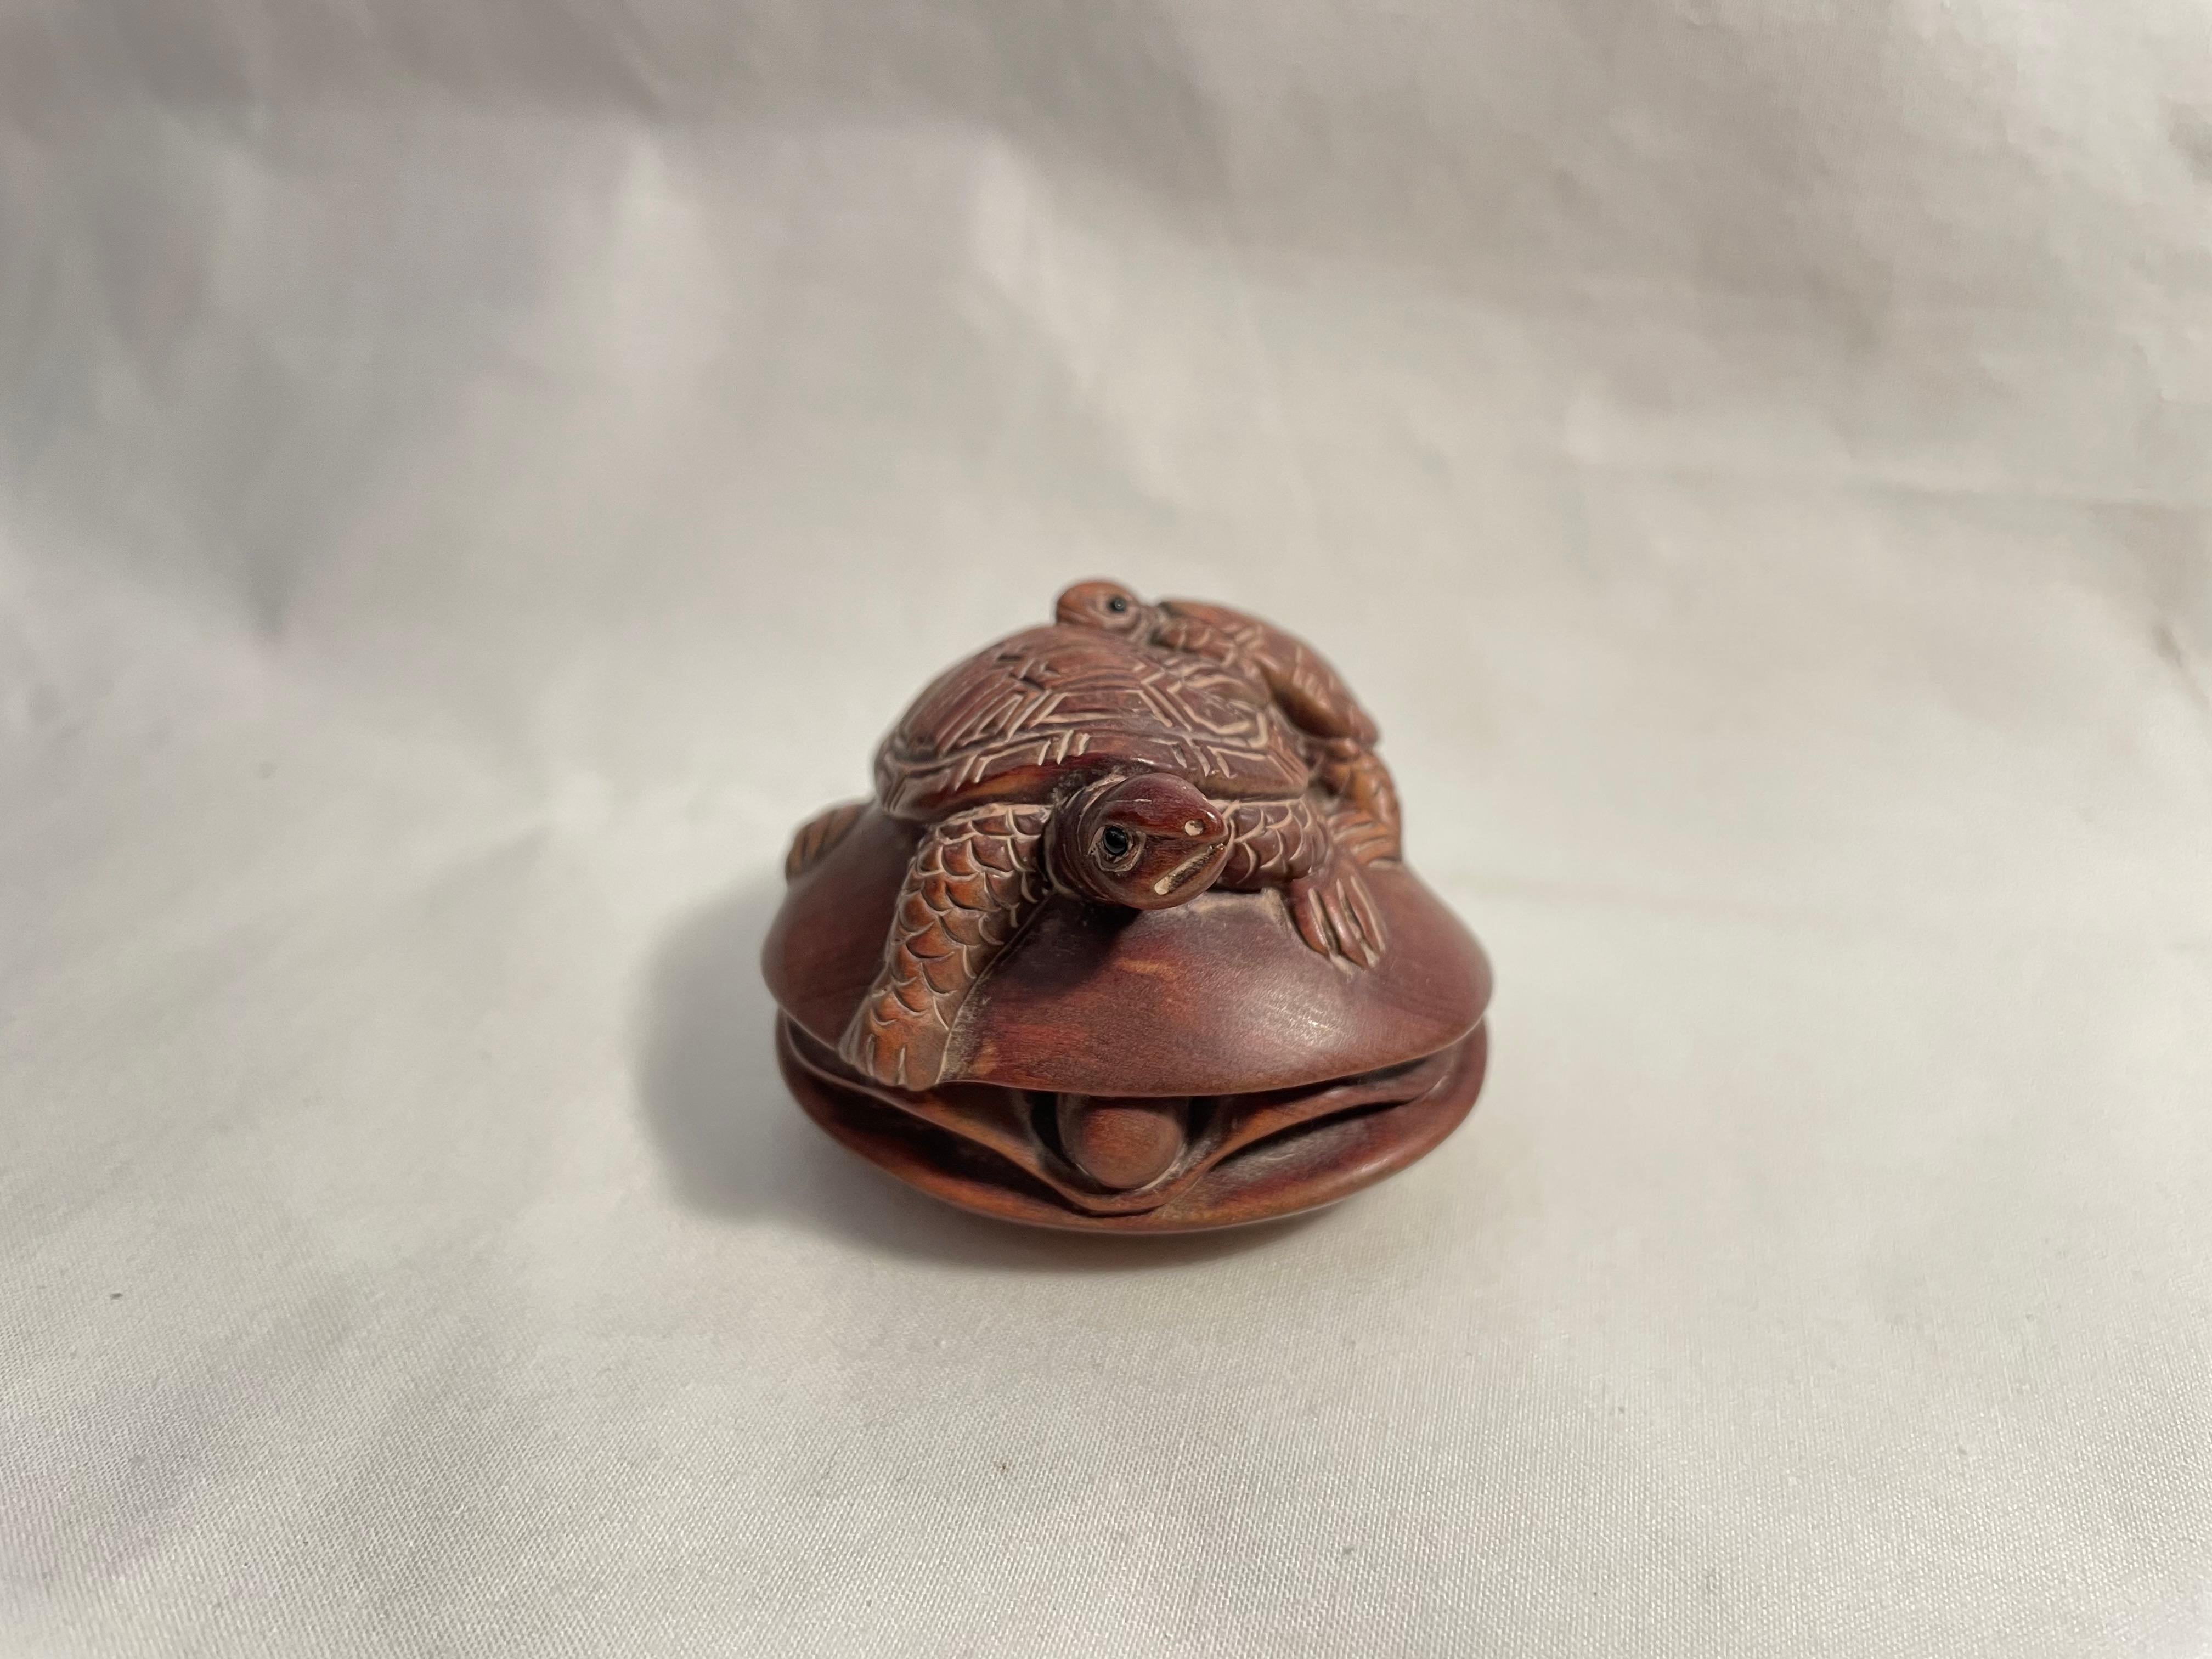 This is an antique netsuke made in Japan around Taisho period 1920s.
This netsuke was made by Katsuei (you can find his signature on the bottom of this netsuke.)
Netsuke is a miniature sculpture, originating in 17th century Japan.
Initially a